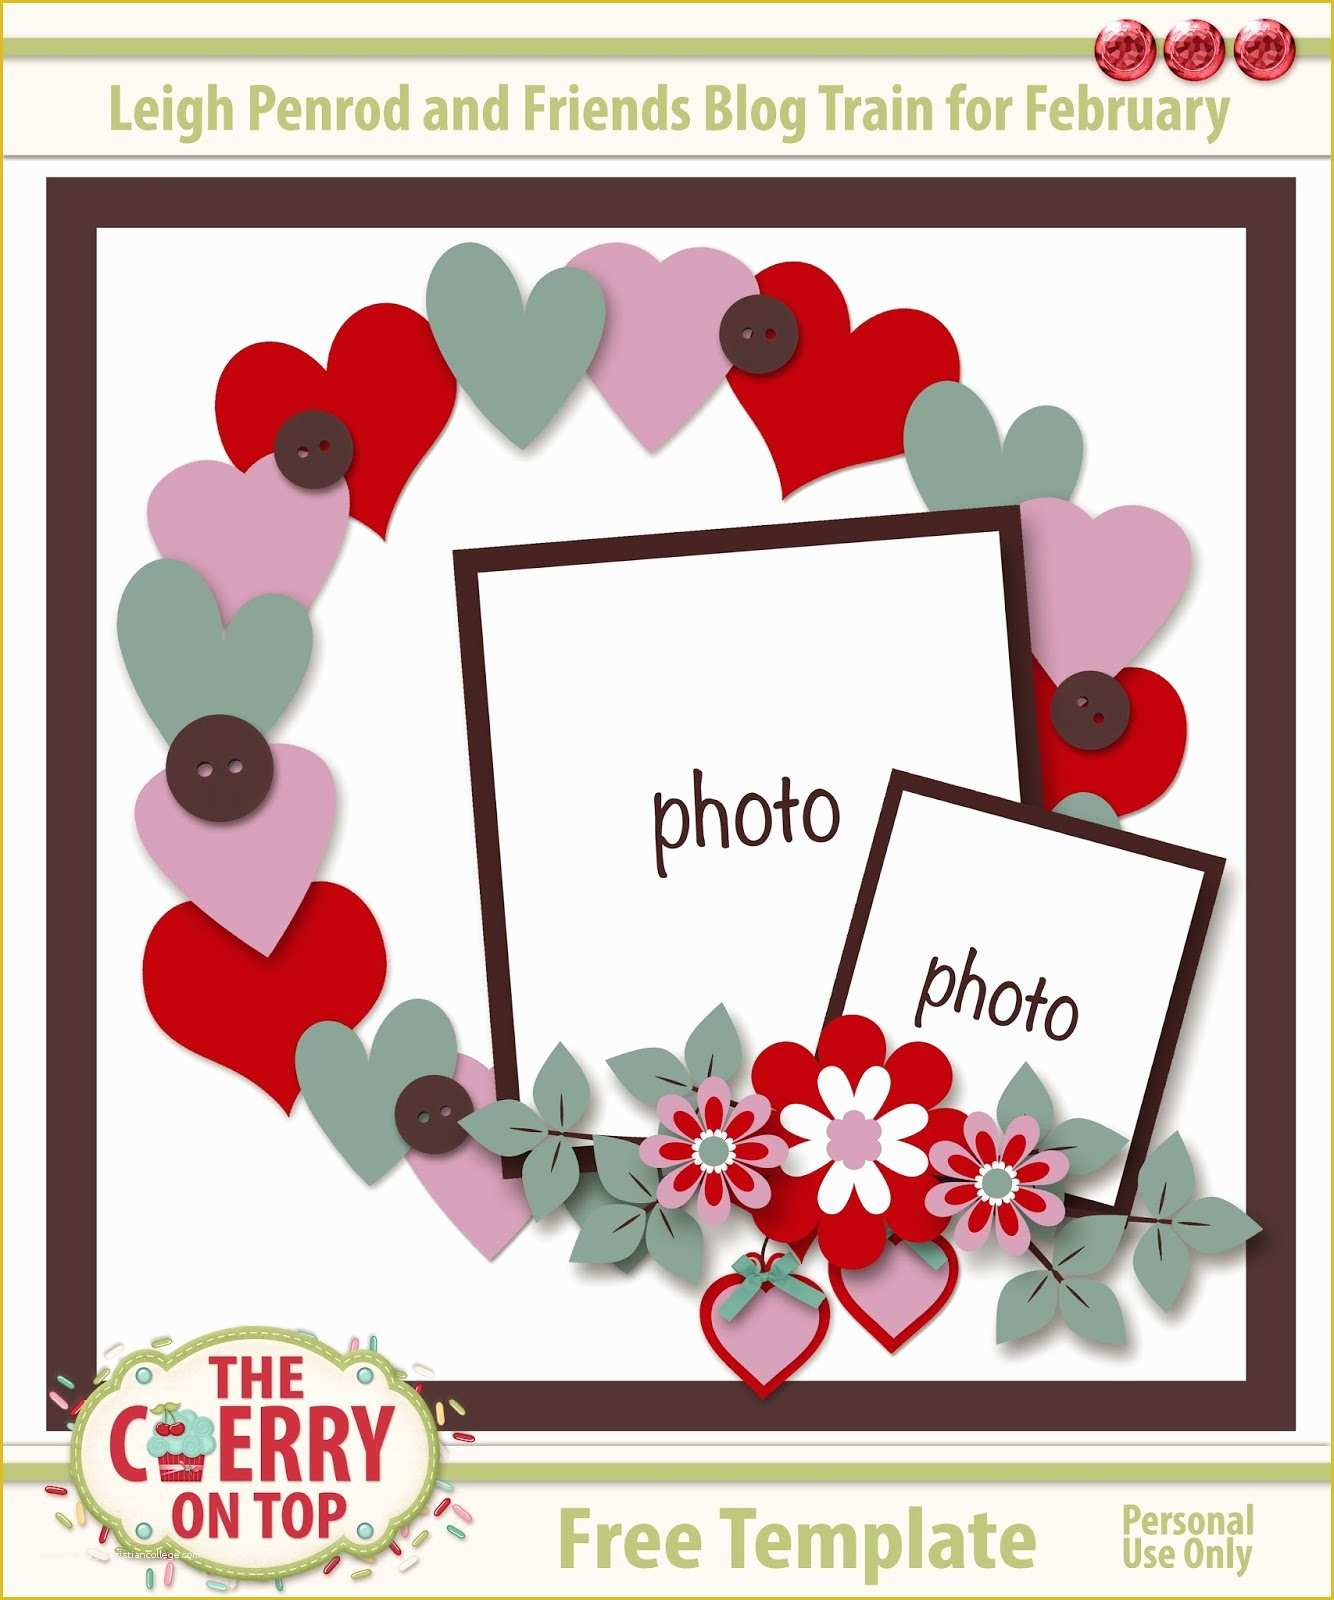 Scrapbook Online Free Templates Of the Cherry top Free Digital Scrapbooking Template for